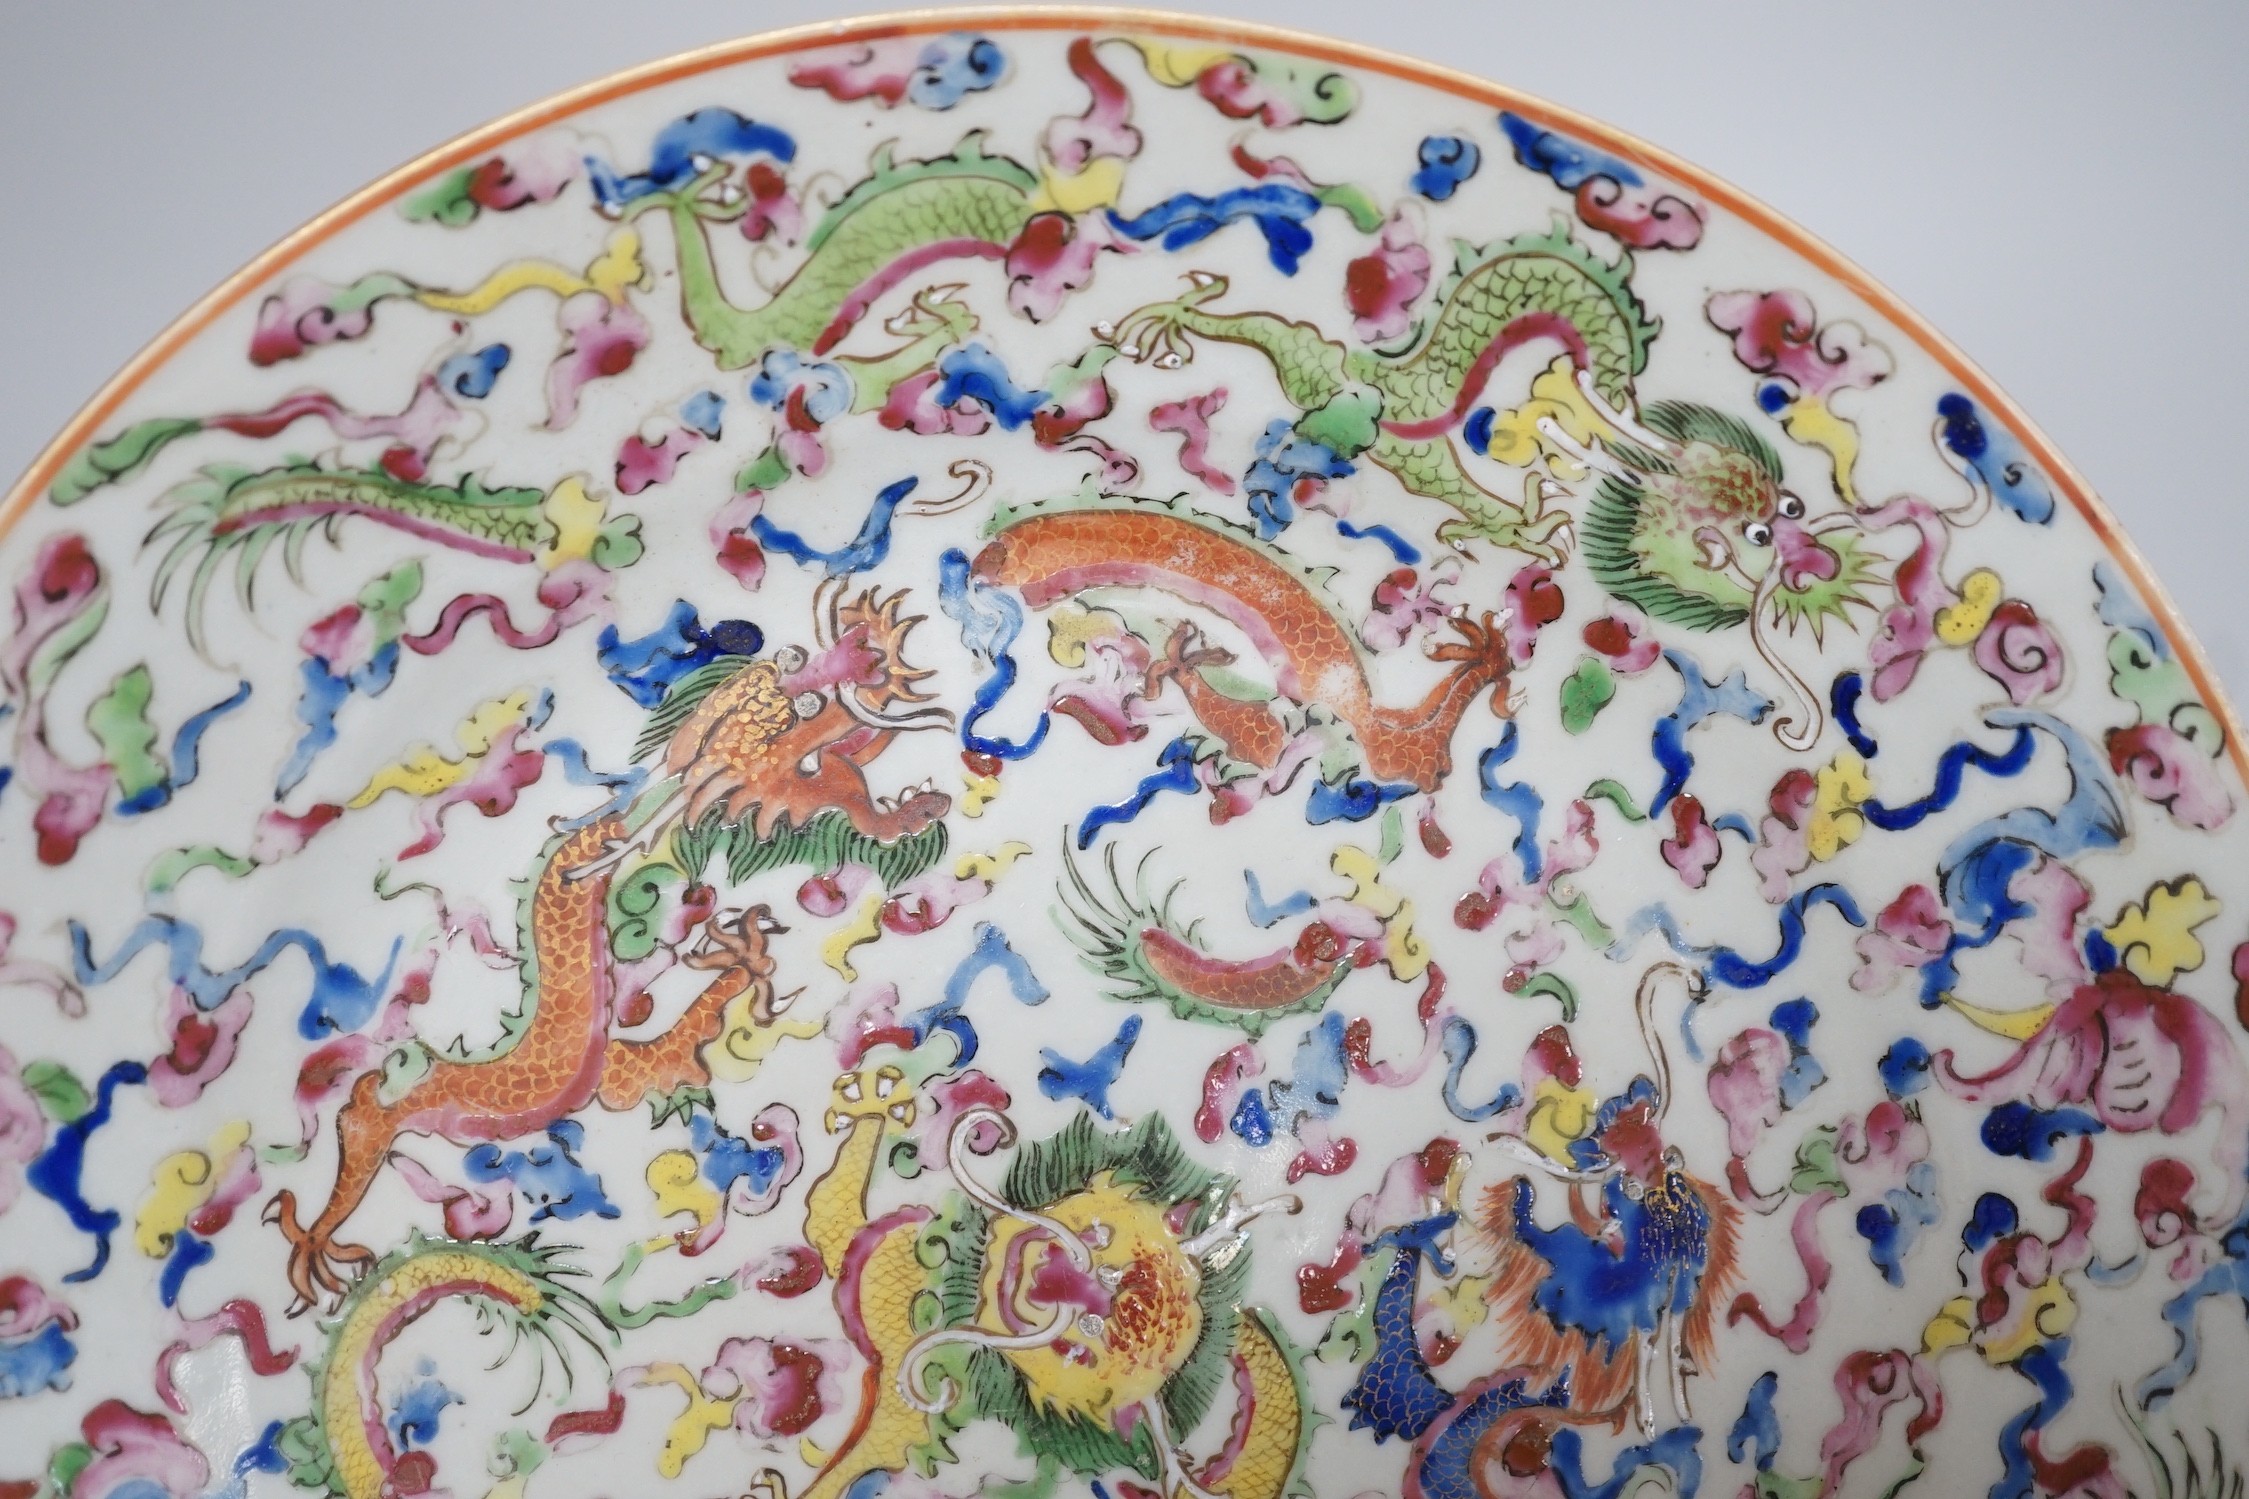 A 19th century Chinese enamelled porcelain ‘dragon’ plate, 23cm